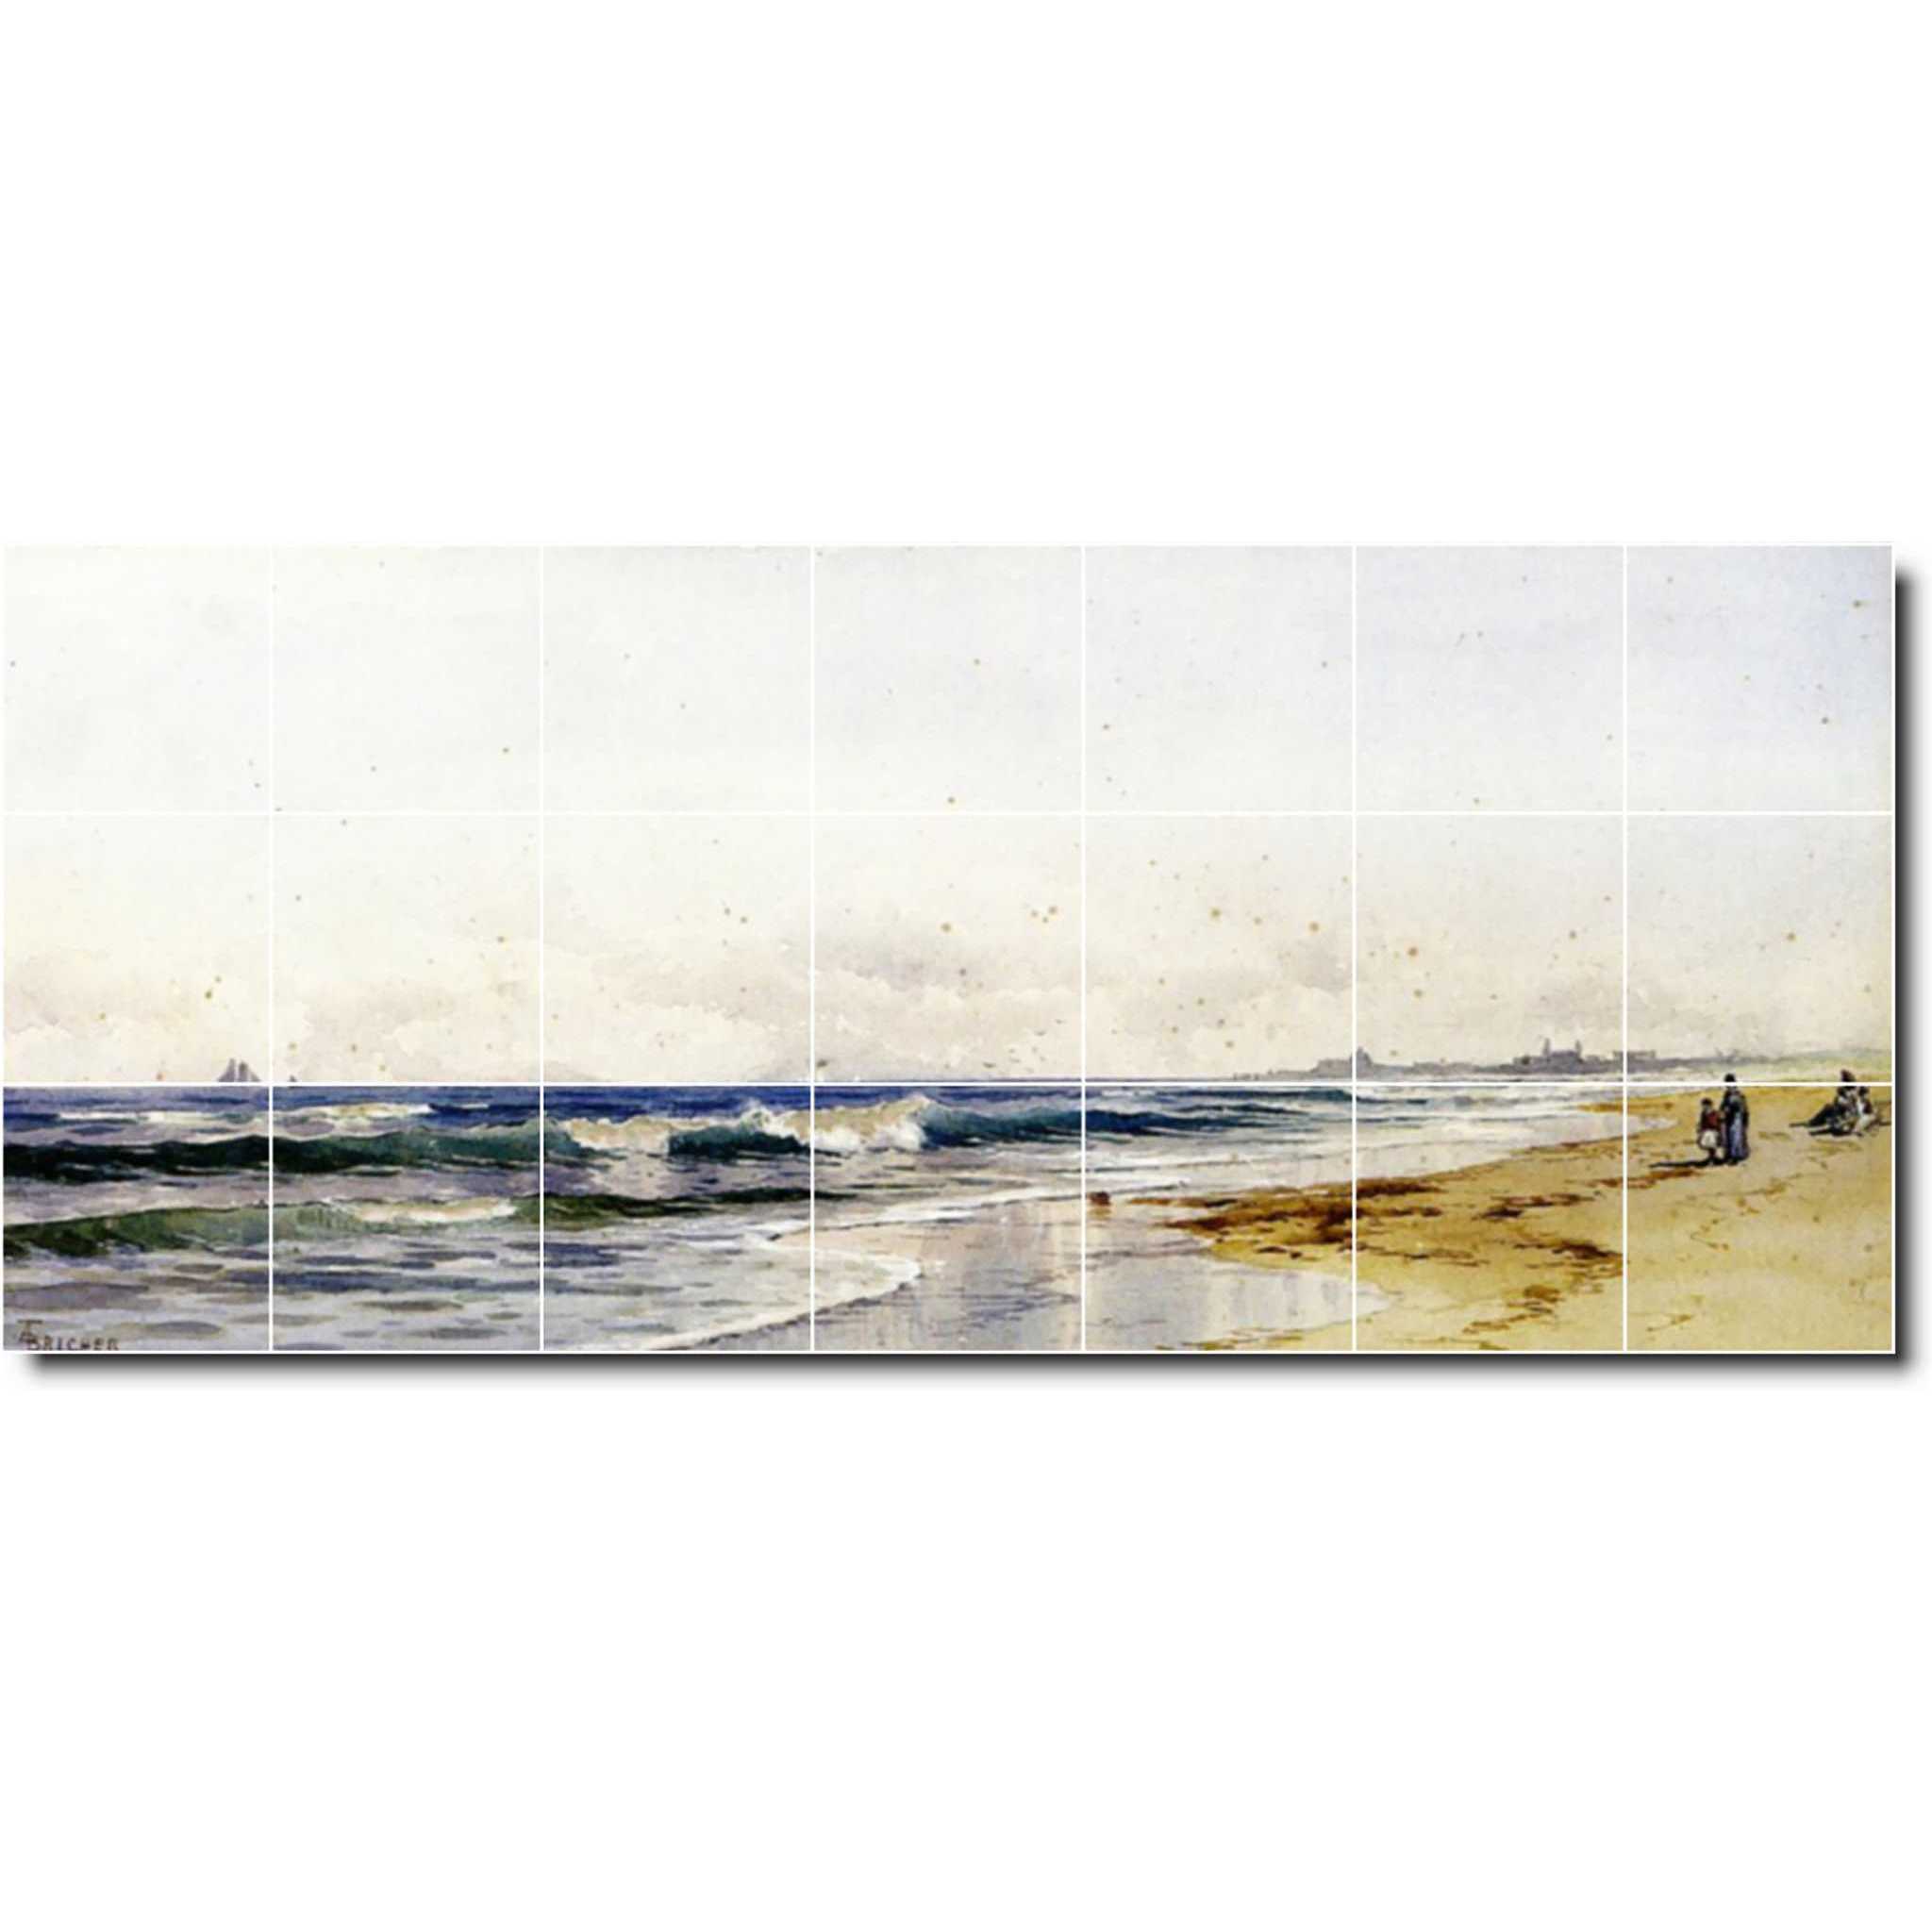 alfred bricher waterfront painting ceramic tile mural p01040